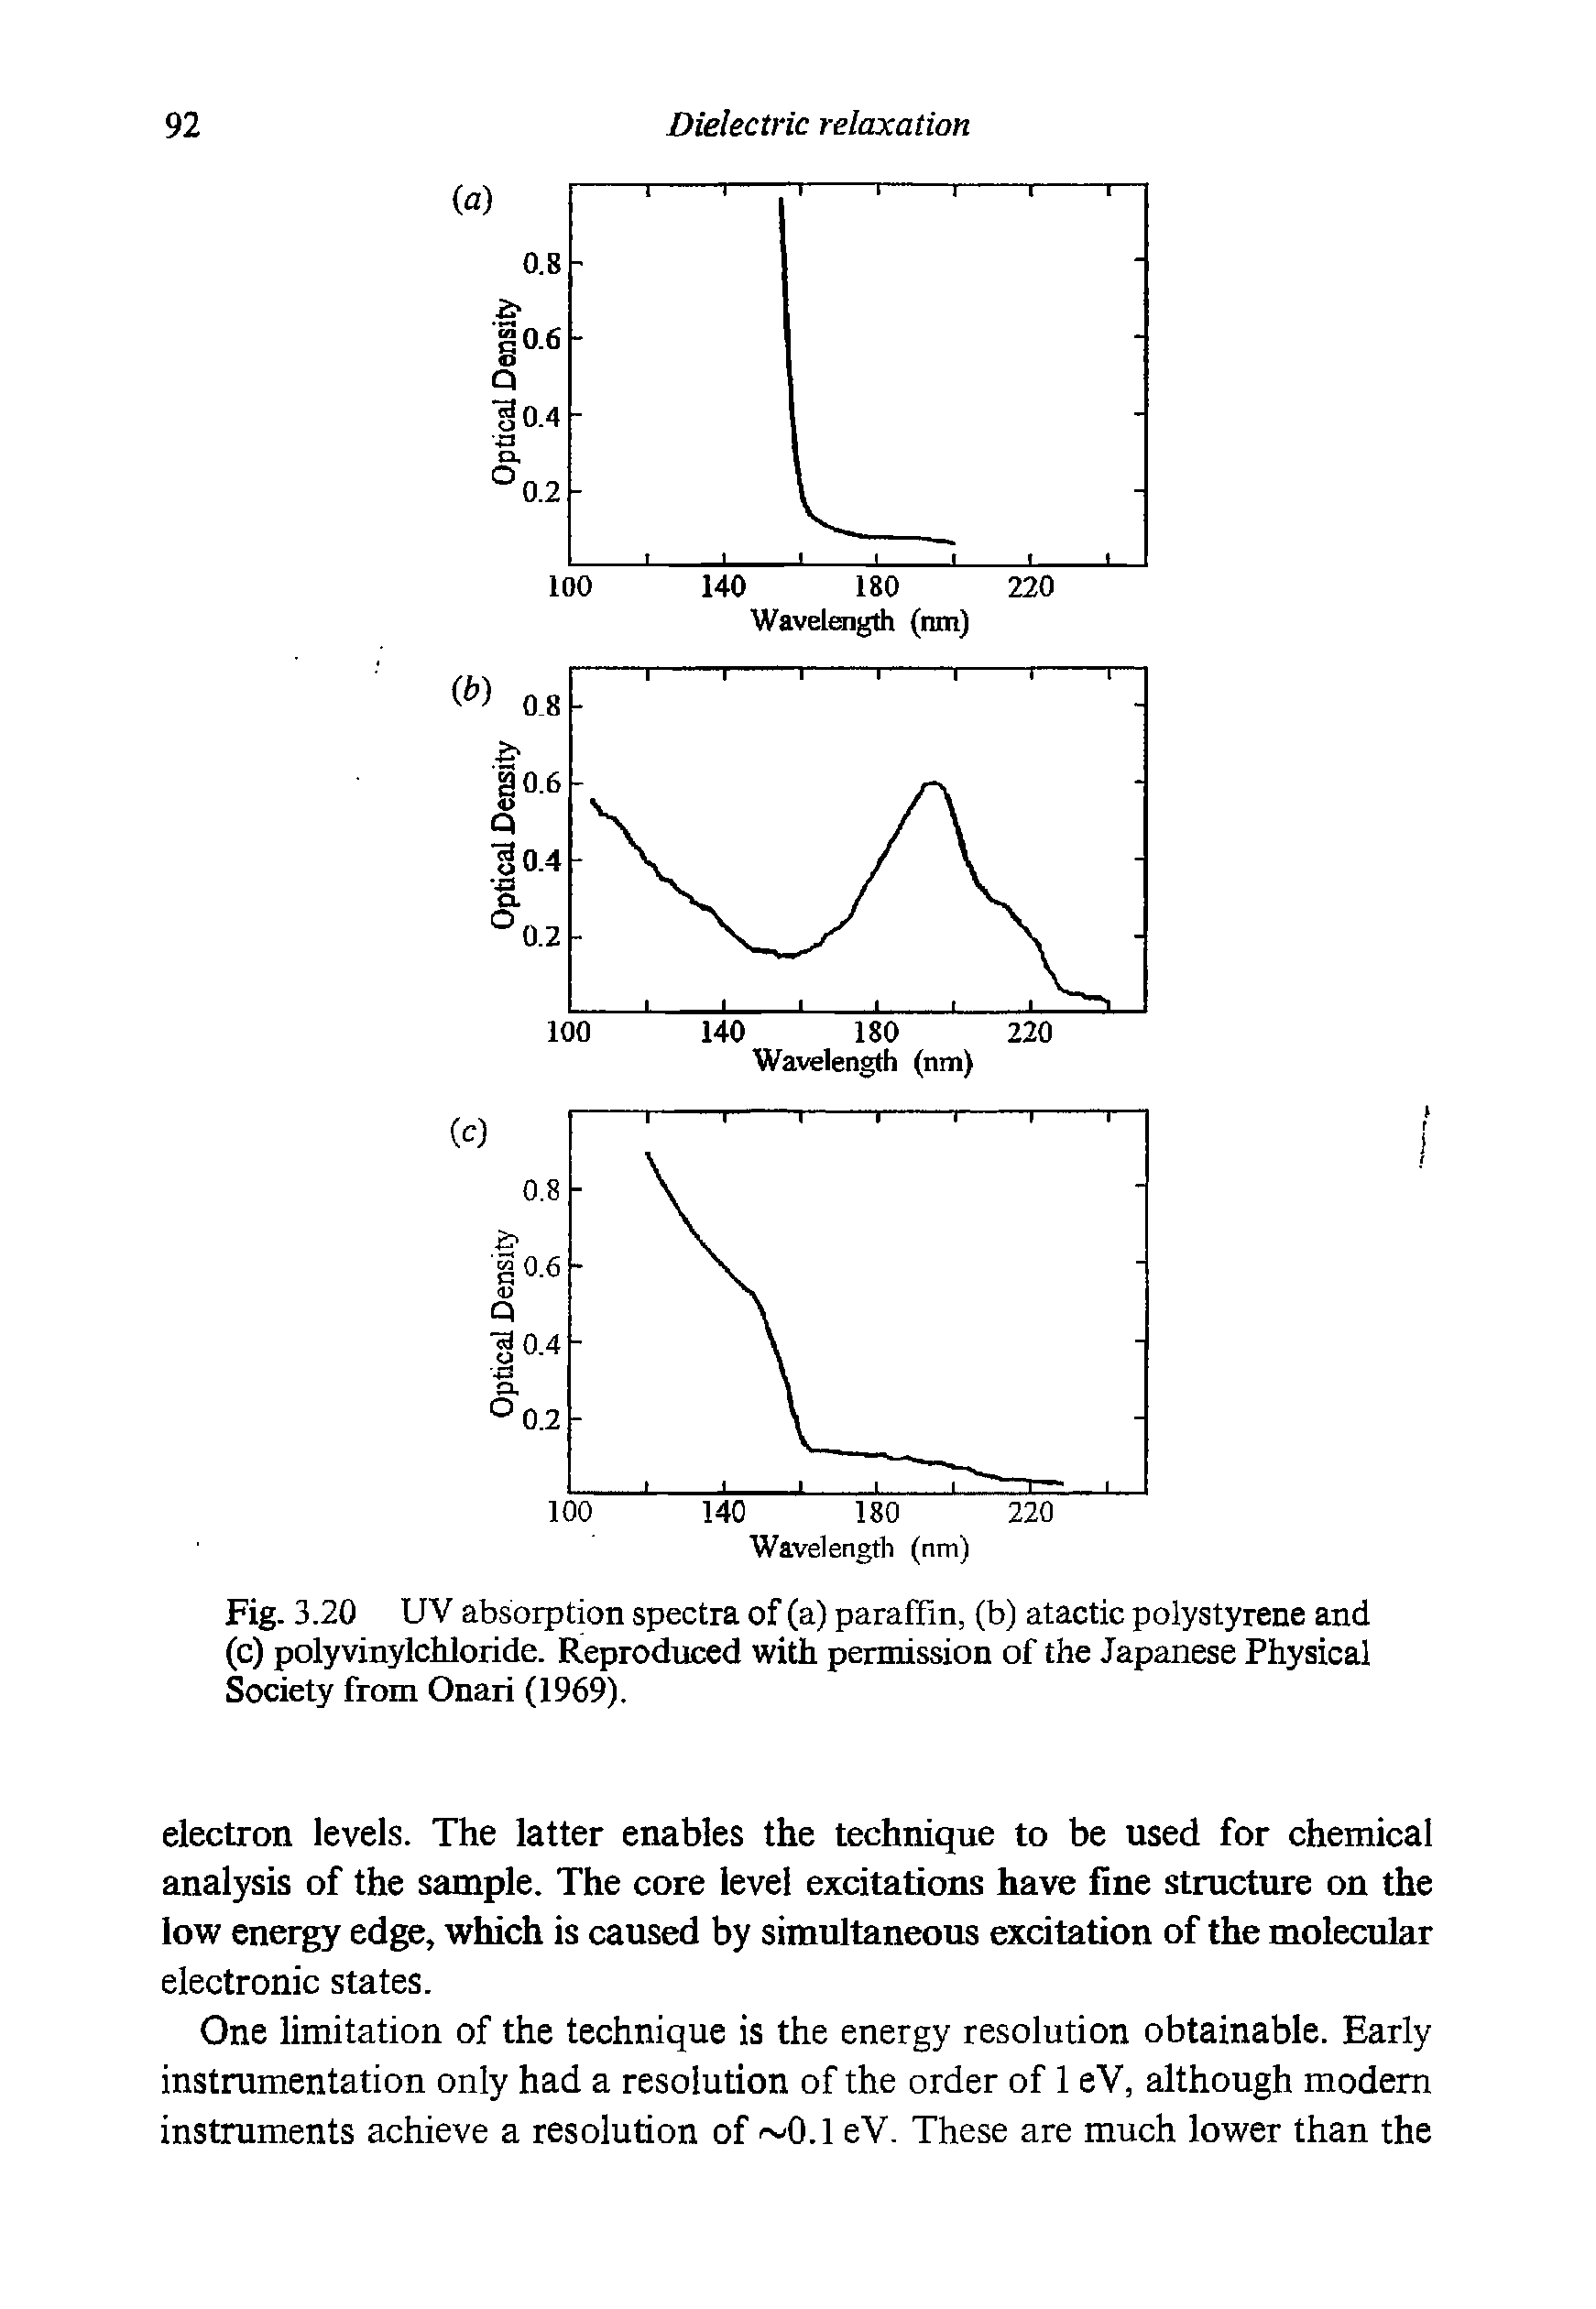 Fig. 3.20 UV absorption spectra of (a) paraffin, (b) atactic polystyrene and (c) polyvinylchloride. Reproduced with permission of the Japanese Physical Society from Onari (1969).